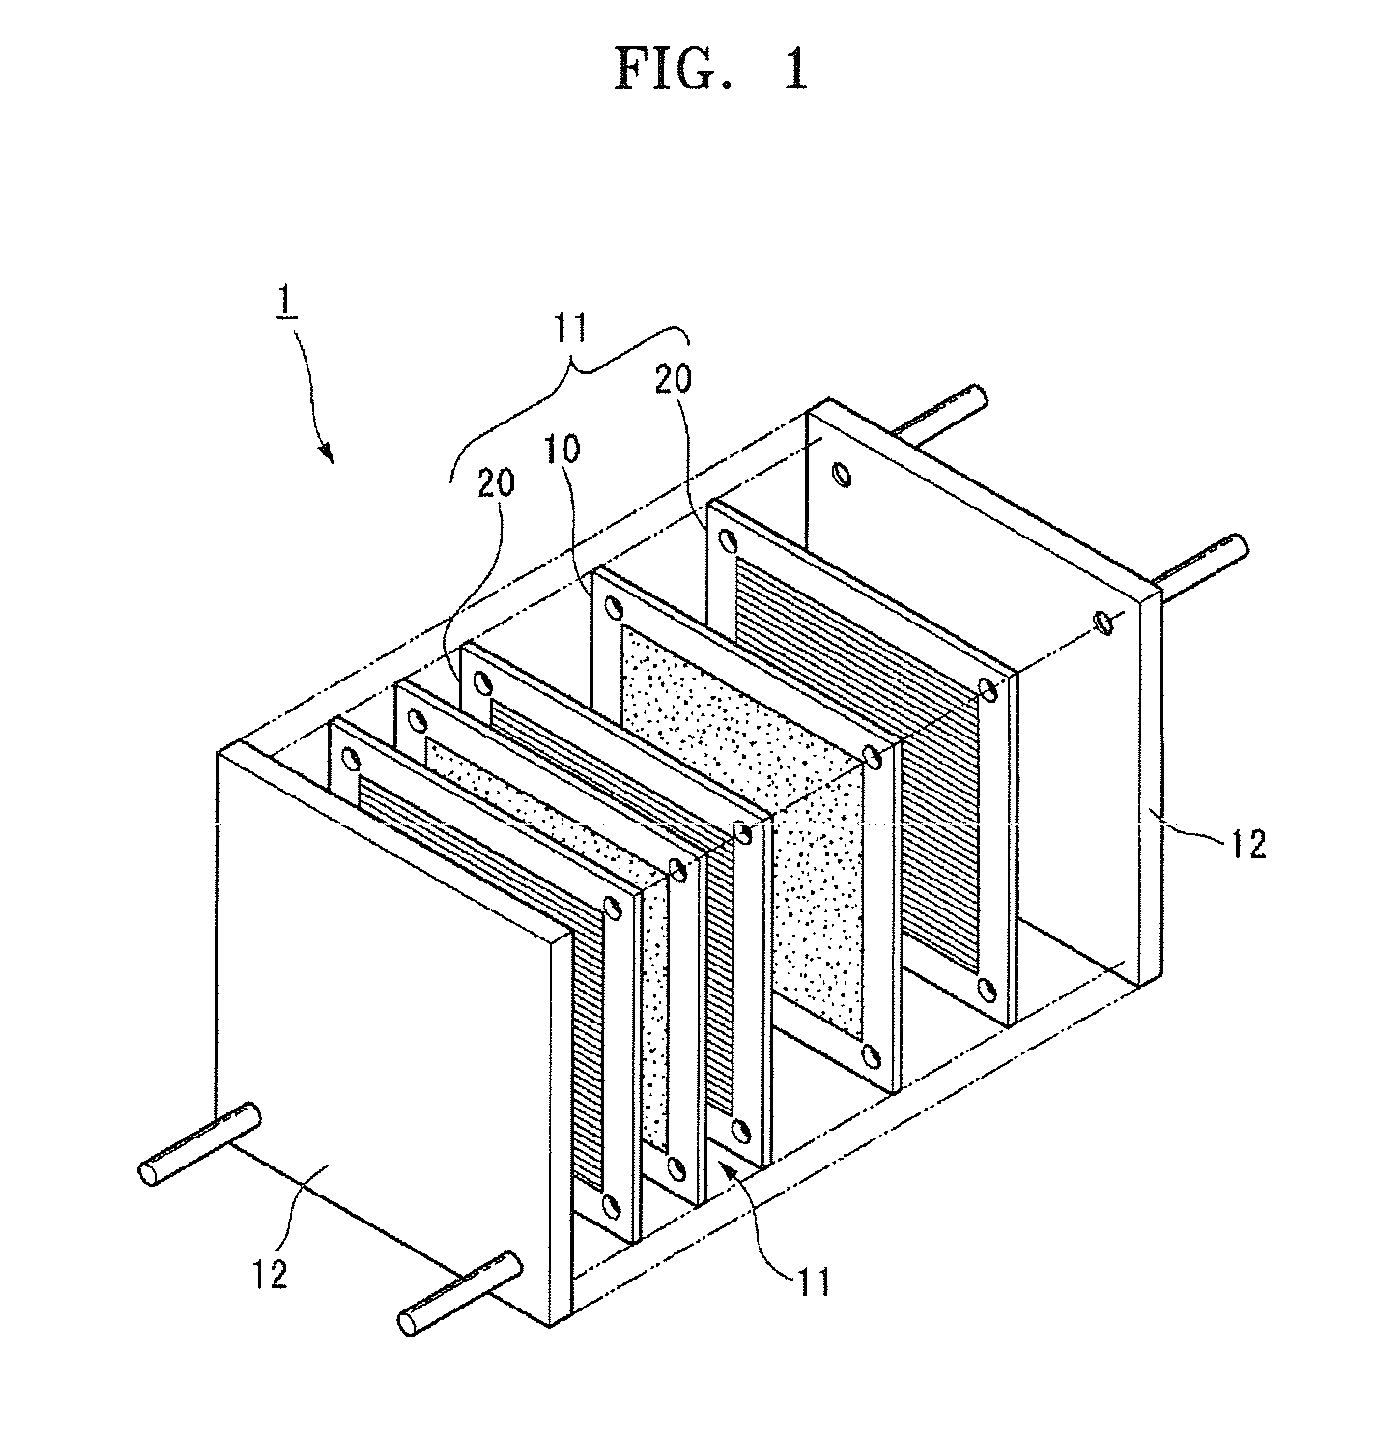 Polymer electrolyte membrane for fuel cell, method of manufacturing the same, and fuel cell employing the same